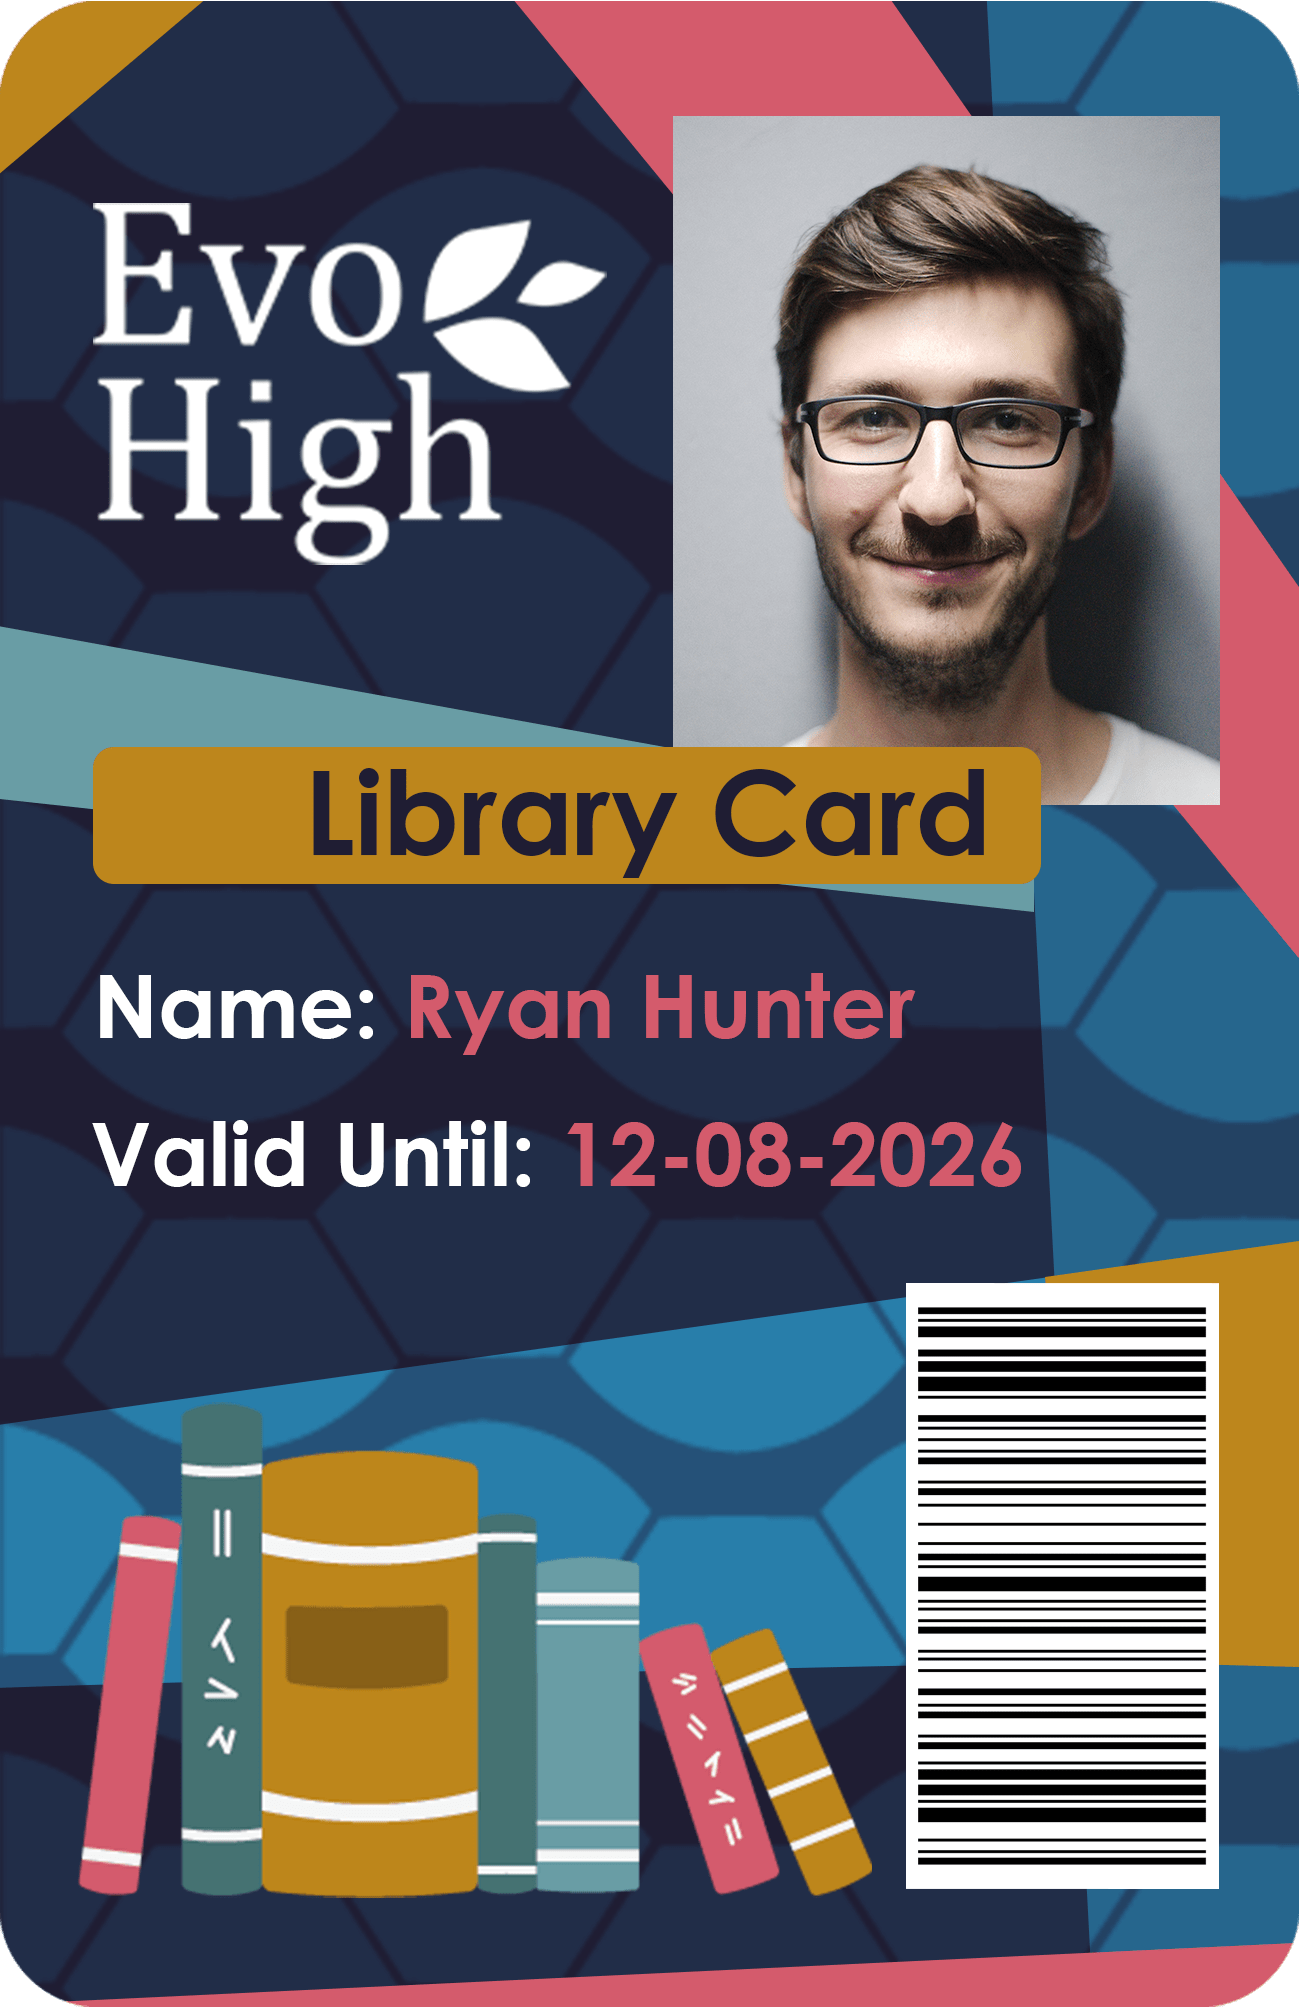 Card template - Library card for Higher Education